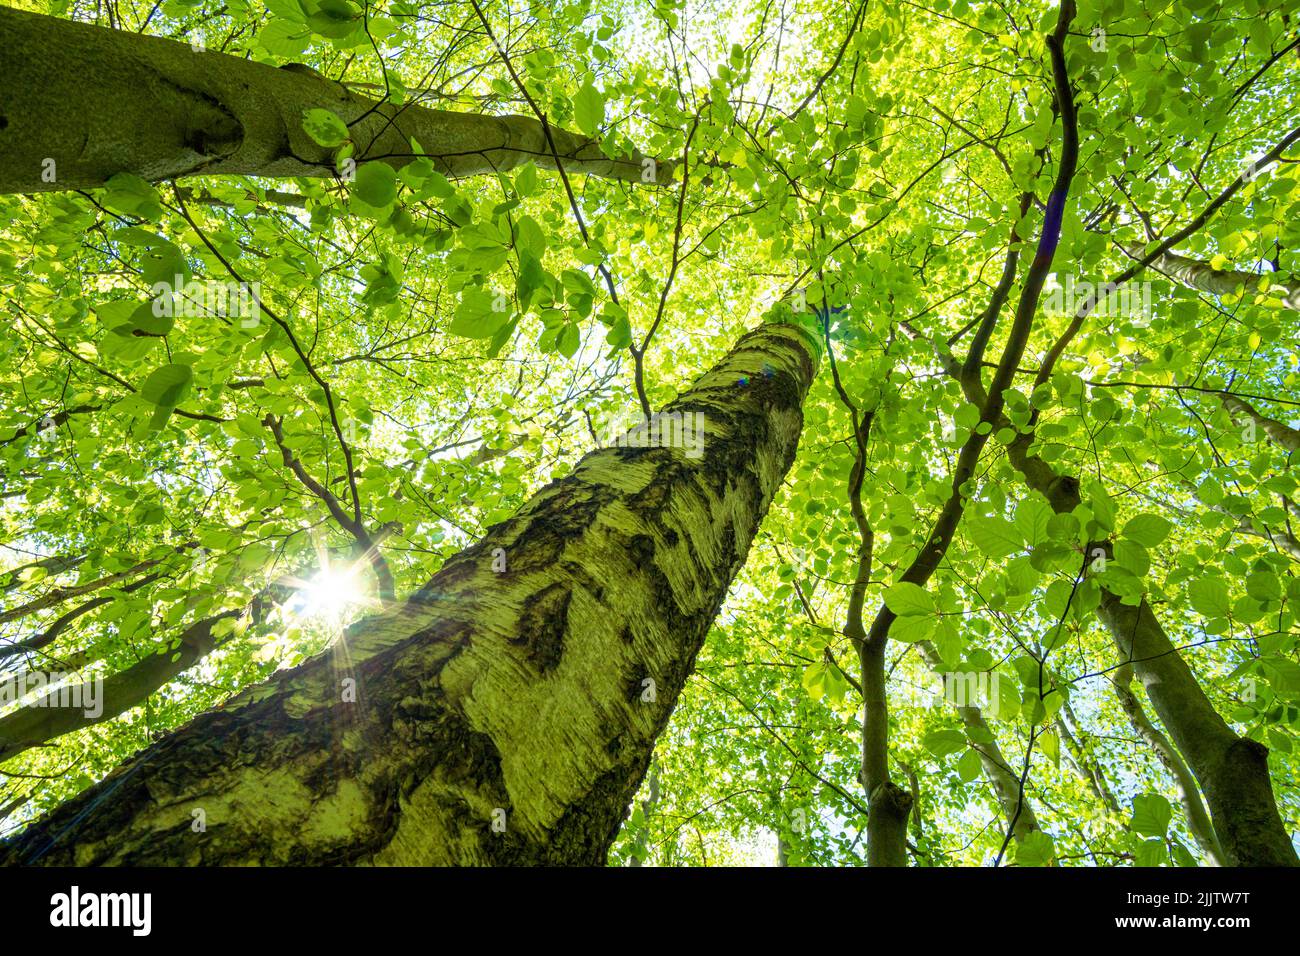 Green crown of a birch in the forest Stock Photo